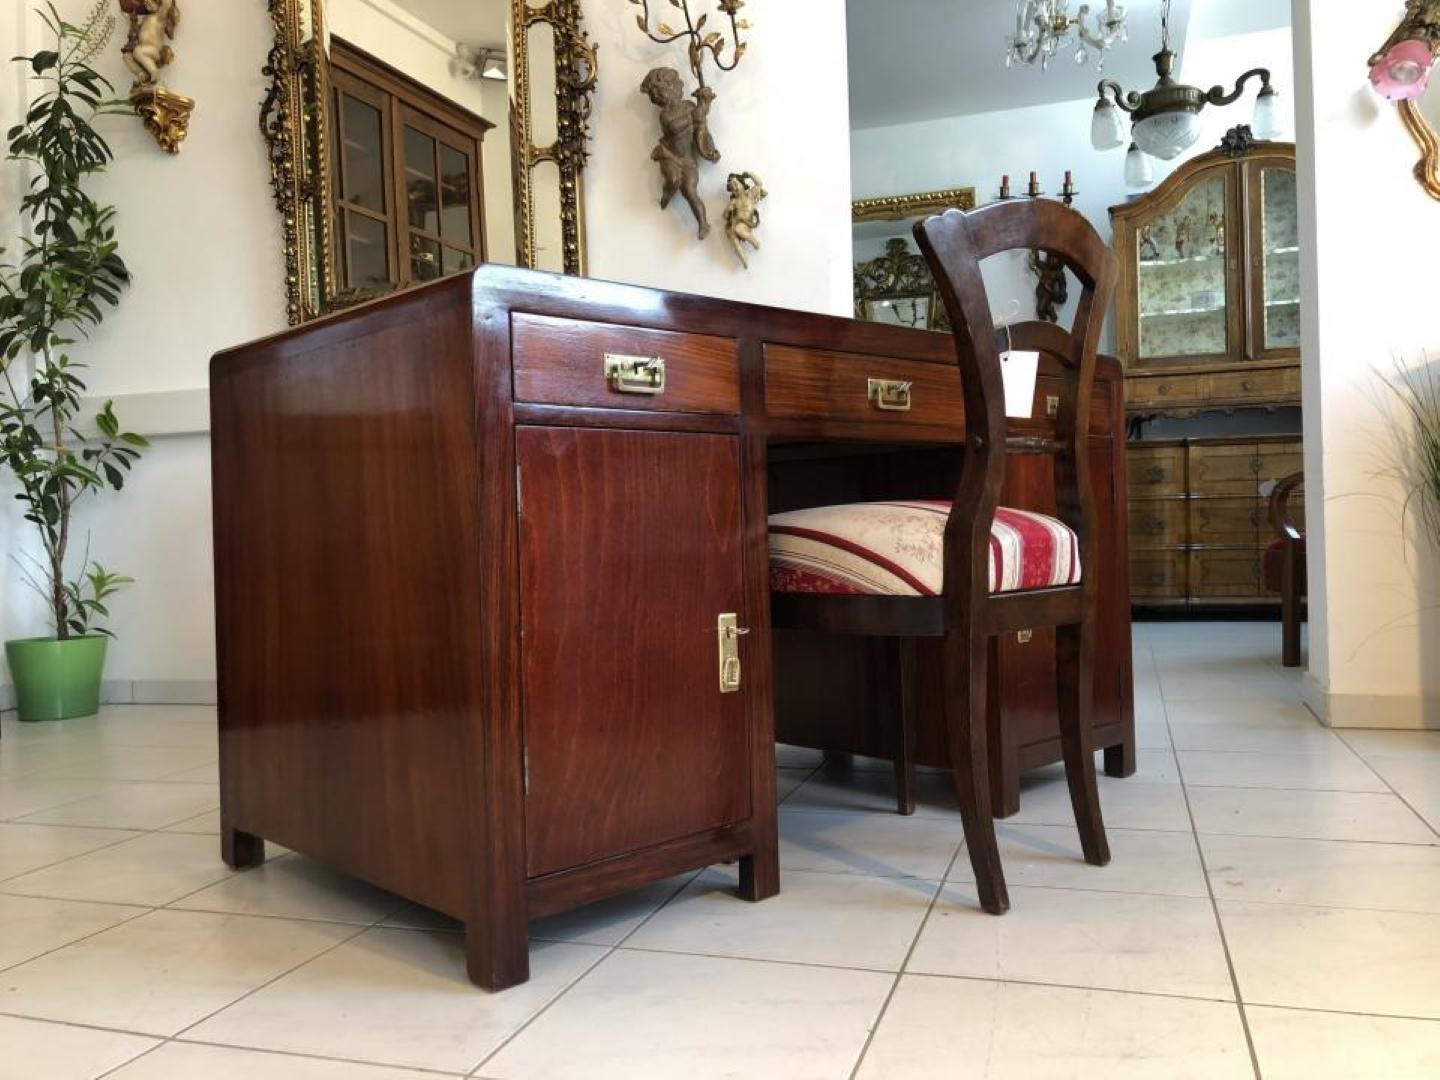 Beautiful men's desk from the Art Deco period.
Pretty and elegant secretary desk produced circa 1910-1925 out of luxurious cherrywood.
This desk is an eyecatcher in your study / office, offers
three drawers, two doors and the original